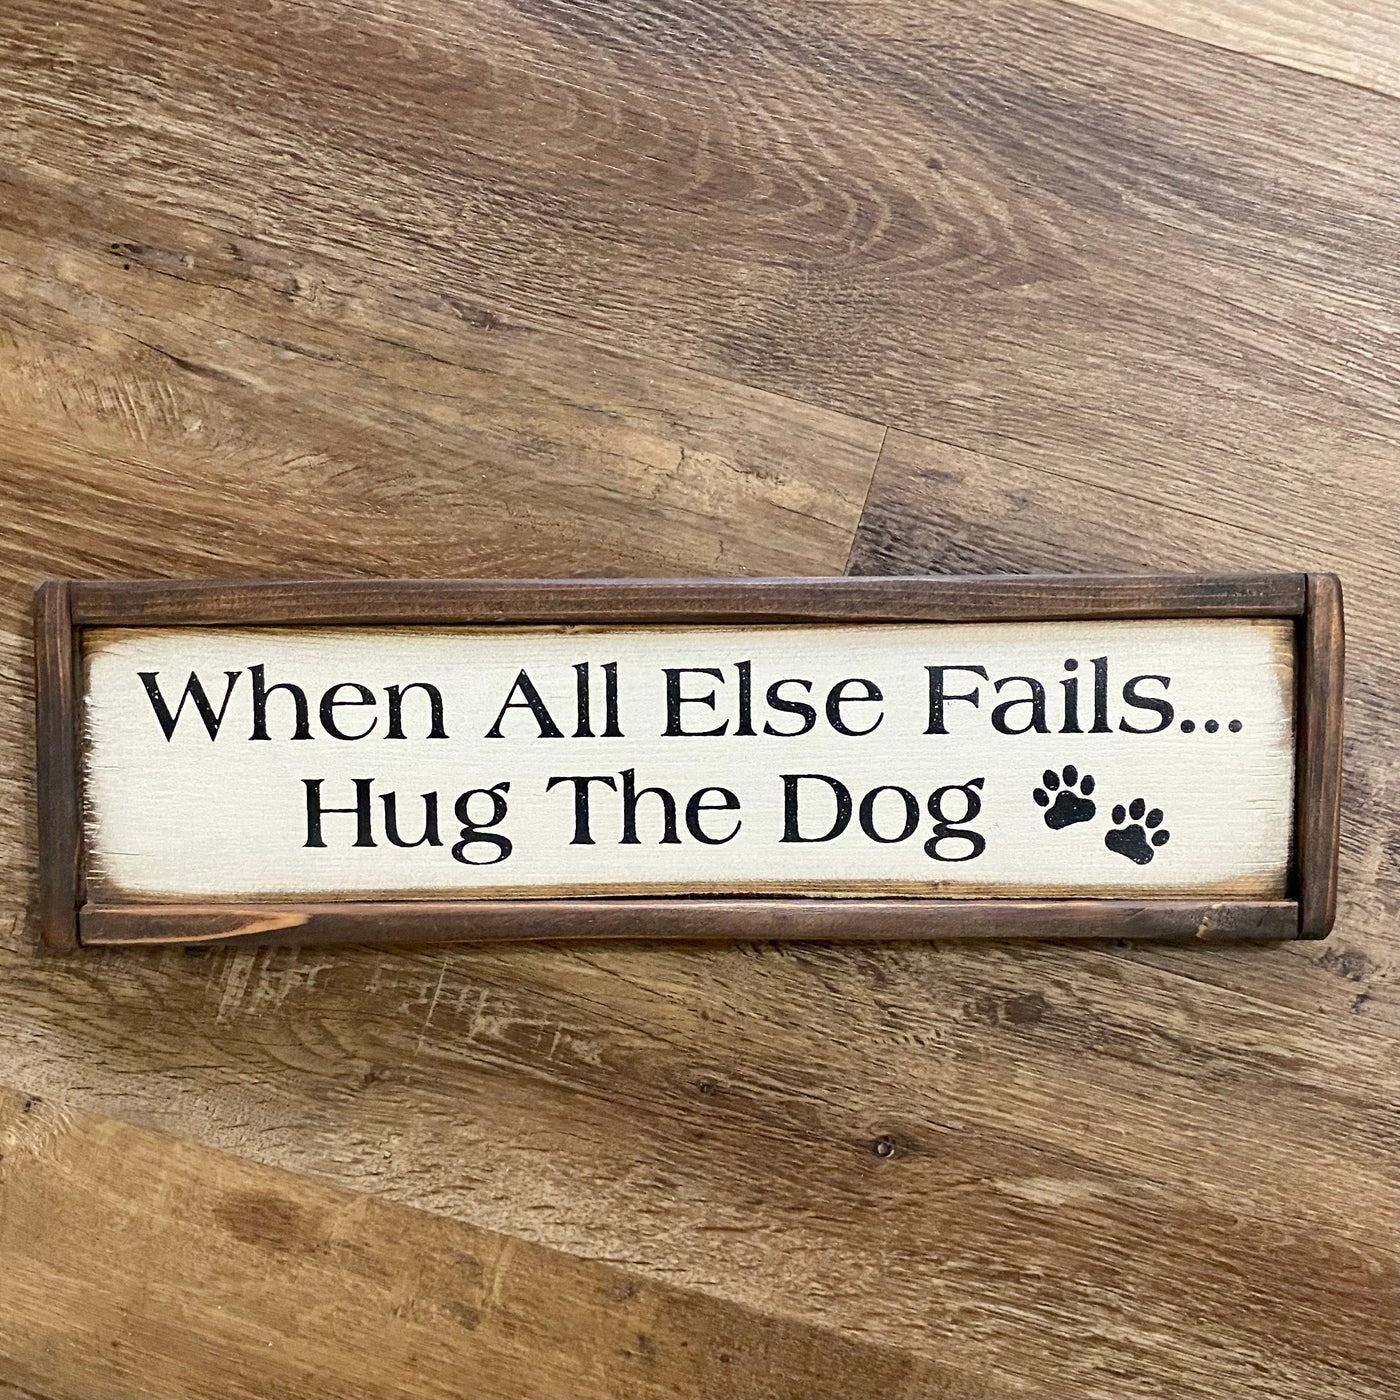 Handmade sign reads When All Else Fails Hug The Dog with paw print accents